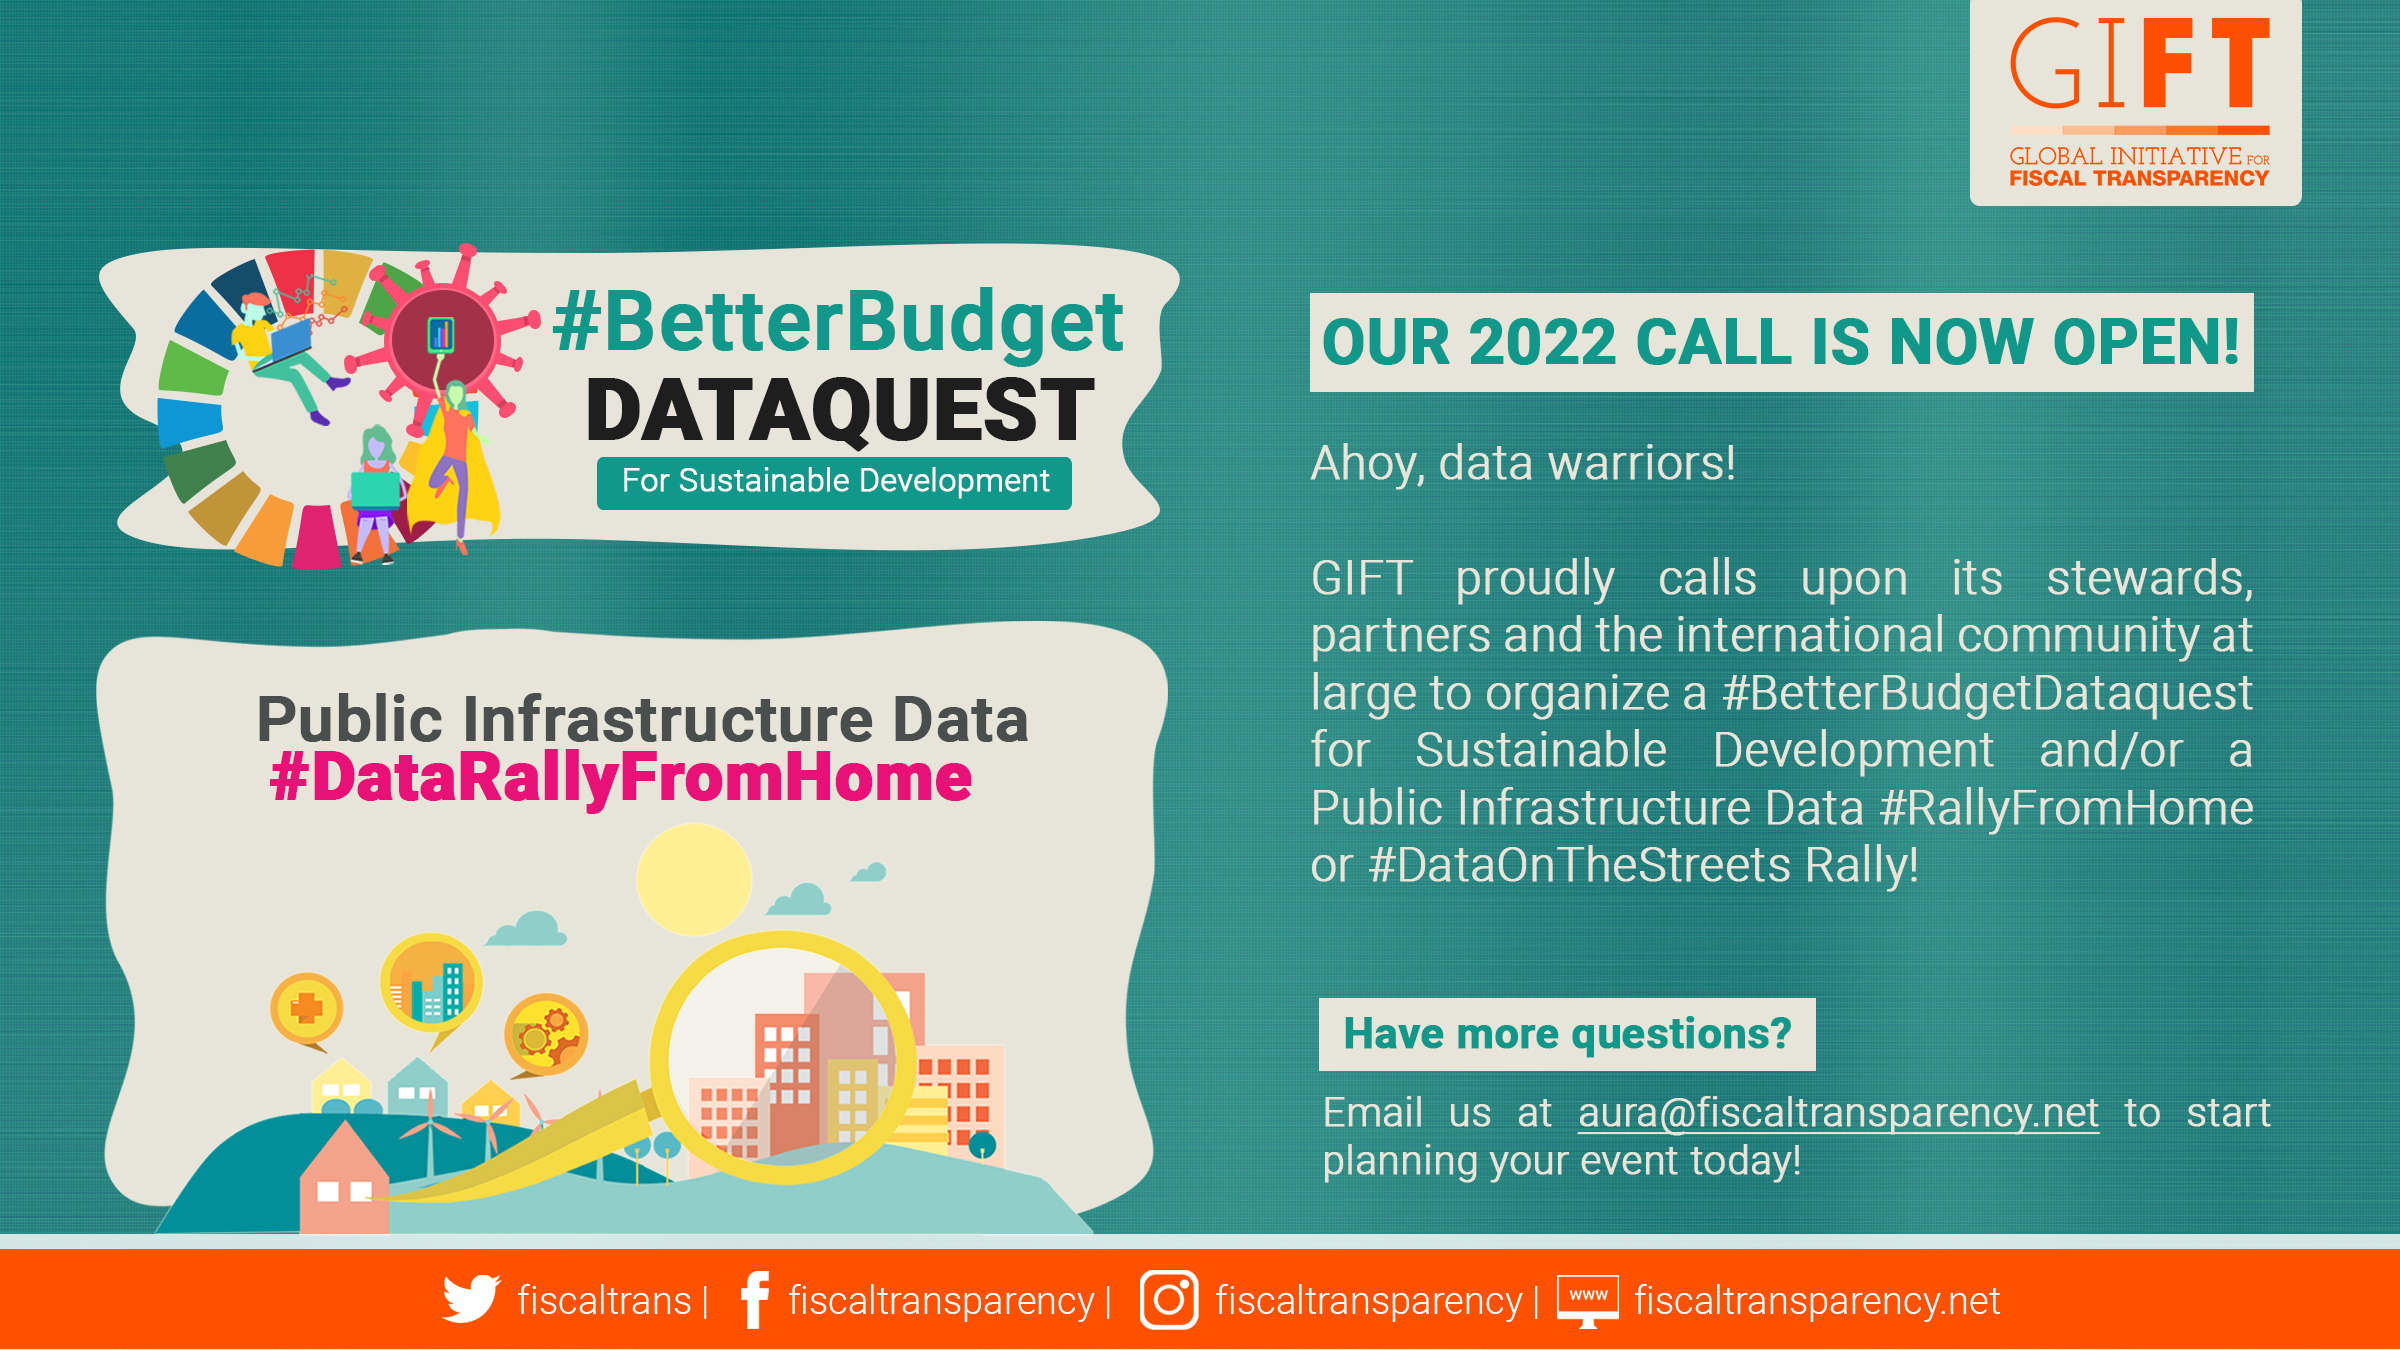 GIFT launches the 2022 call to host a #BetterBudgetDataquest for Sustainable Development or a Public Infrastructure Data #RallyFromHome